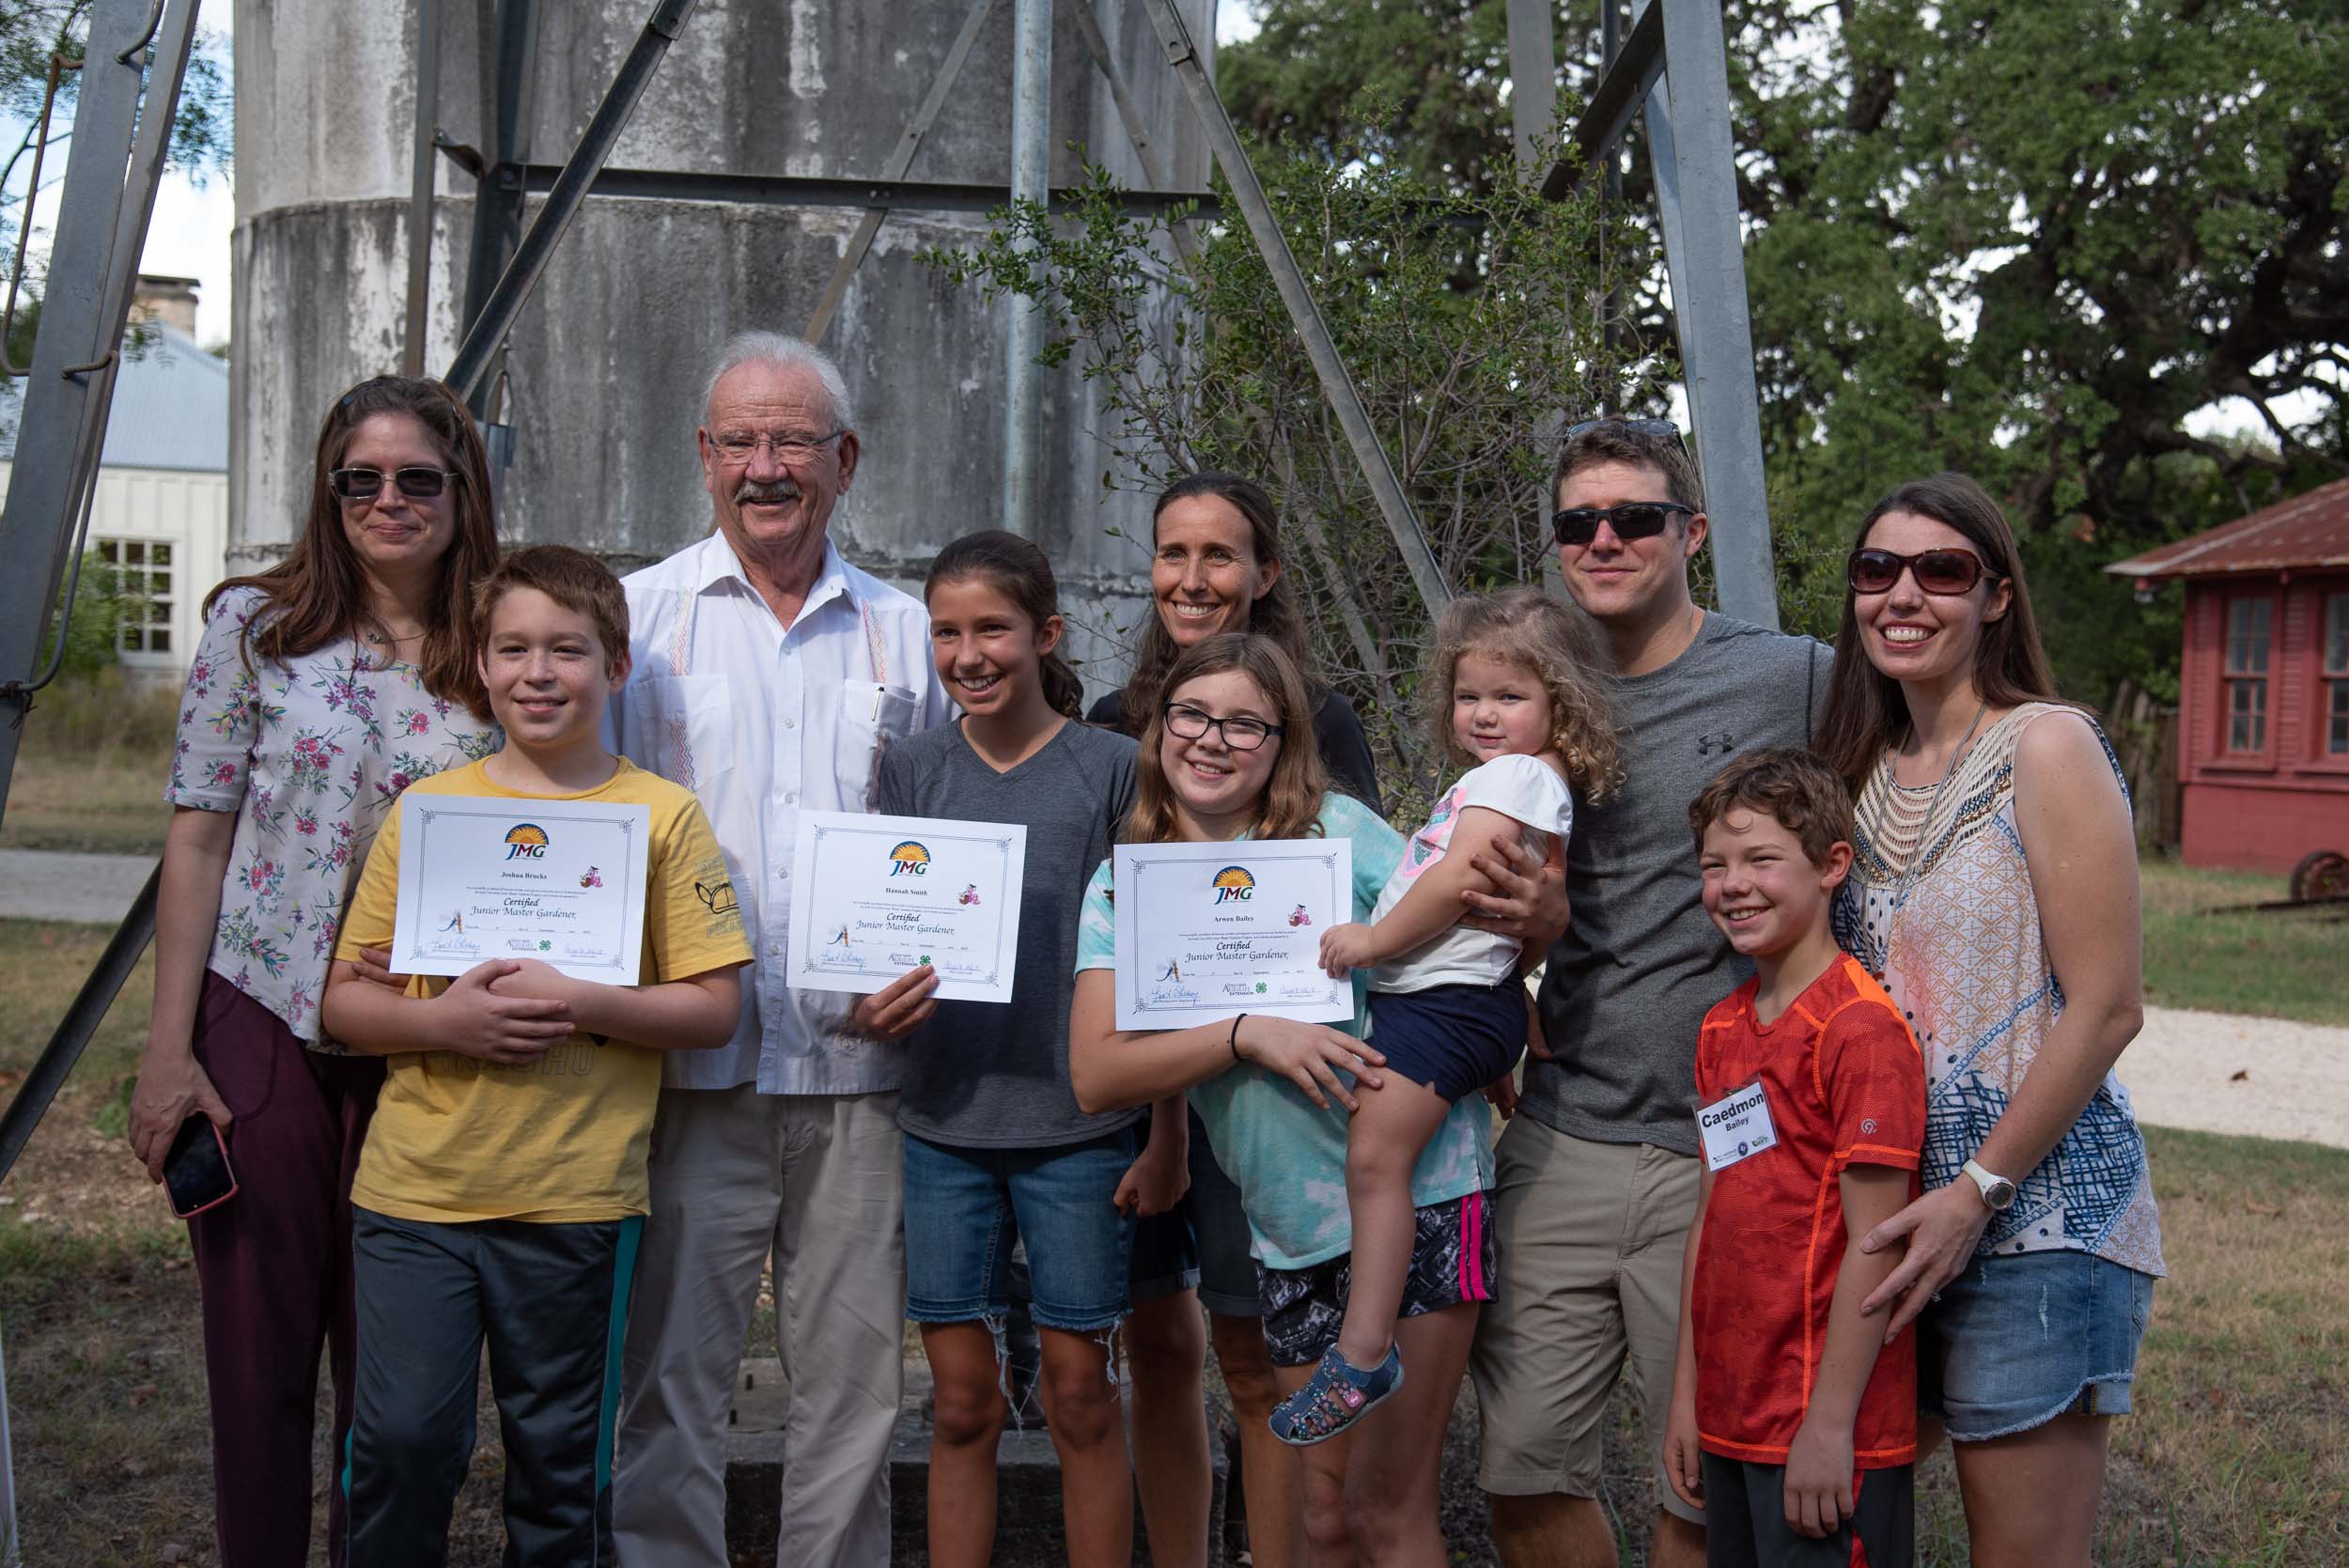  Former San Antonio Mayor and park namesake, Phil Hardberger (third from the left) stands with the three Junior Master Gardeners and their families.  